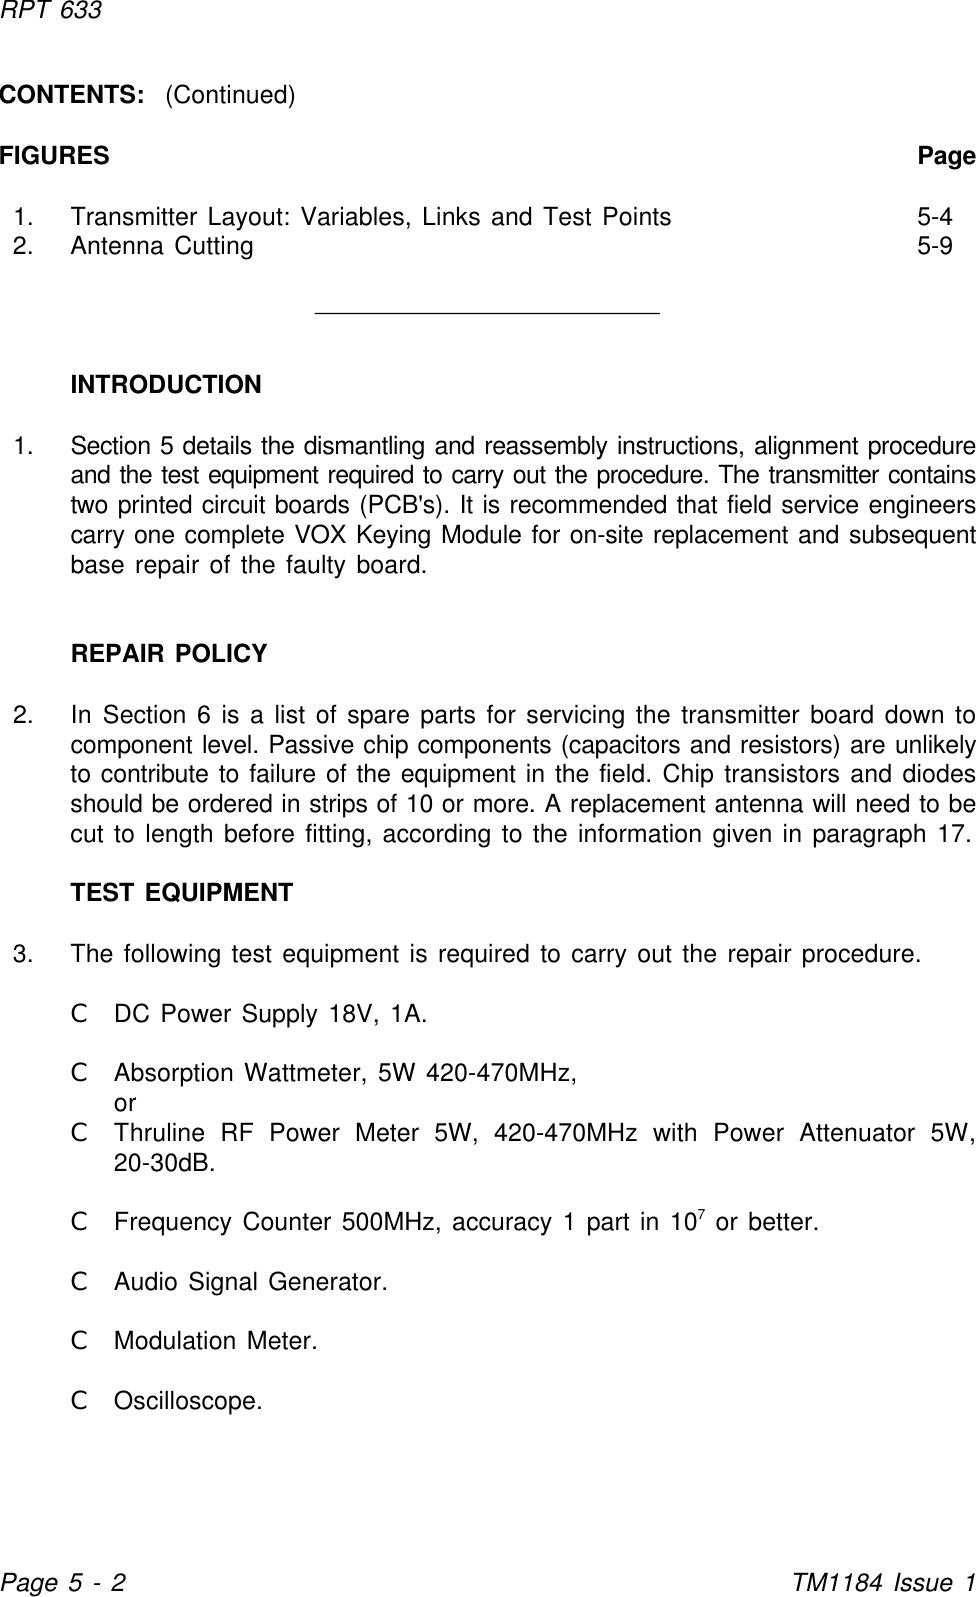 RPT 633Page 5 - 2TM1184 Issue 1CONTENTS:  (Continued)FIGURES Page1. Transmitter Layout: Variables, Links and Test Points 5-42. Antenna Cutting 5-9_______________________INTRODUCTION1. Section 5 details the dismantling and reassembly instructions, alignment procedureand the test equipment required to carry out the procedure. The transmitter containstwo printed circuit boards (PCB&apos;s). It is recommended that field service engineerscarry one complete VOX Keying Module for on-site replacement and subsequentbase repair of the faulty board.REPAIR POLICY2. In Section 6 is a list of spare parts for servicing the transmitter board down tocomponent level. Passive chip components (capacitors and resistors) are unlikelyto contribute to failure of the equipment in the field. Chip transistors and diodesshould be ordered in strips of 10 or more. A replacement antenna will need to becut to length before fitting, according to the information given in paragraph 17.TEST EQUIPMENT3. The following test equipment is required to carry out the repair procedure.CDC Power Supply 18V, 1A.CAbsorption Wattmeter, 5W 420-470MHz,orCThruline RF Power Meter 5W, 420-470MHz with Power Attenuator 5W,20-30dB.CFrequency Counter 500MHz, accuracy 1 part in 10  or better.7CAudio Signal Generator.CModulation Meter.COscilloscope.